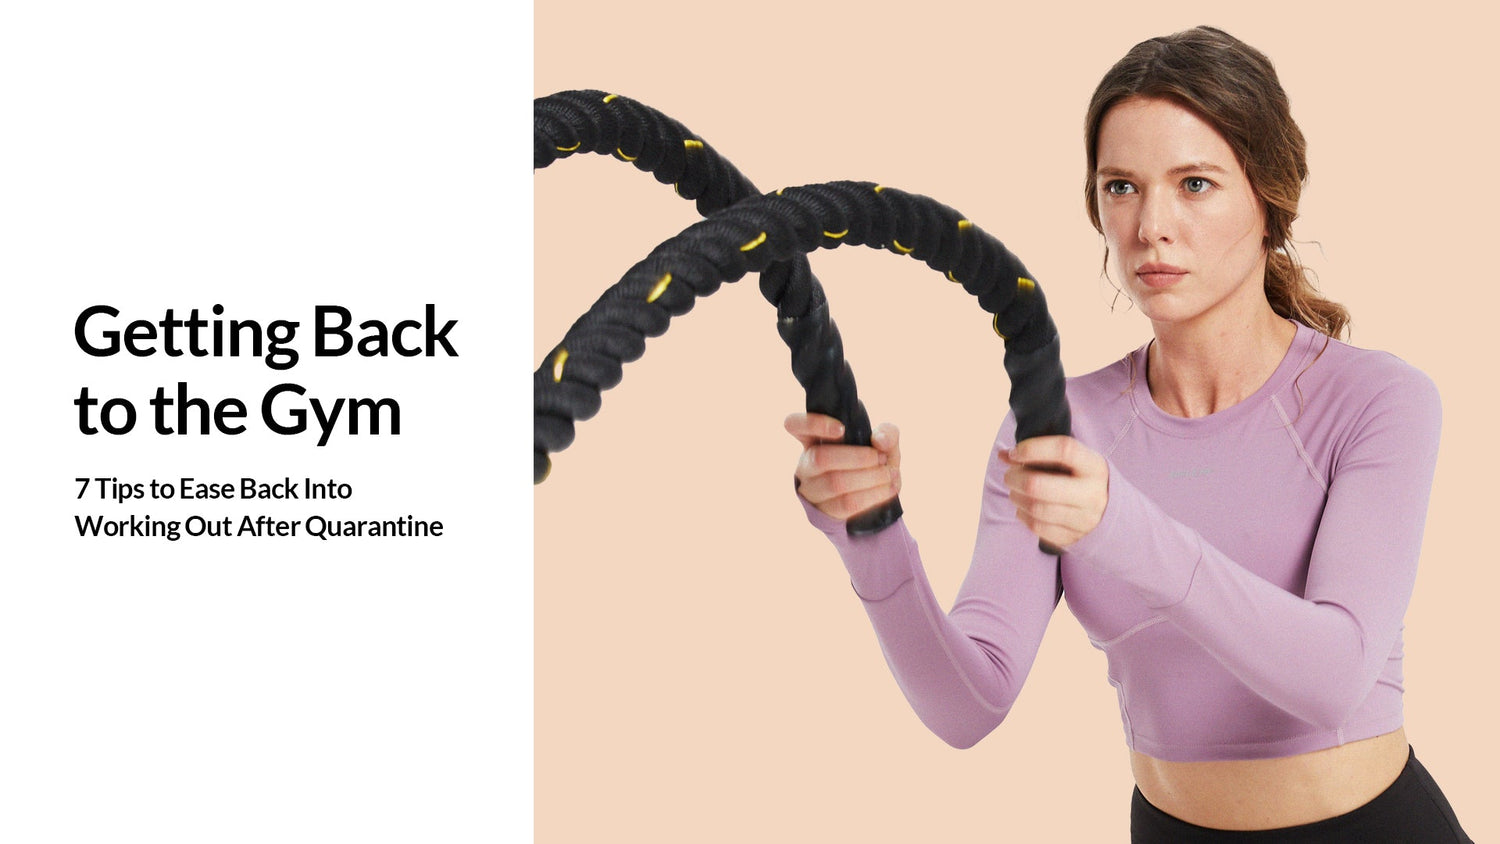 Getting Back to the Gym – 7 Tips to Ease Back Into Working Out After Quarantine